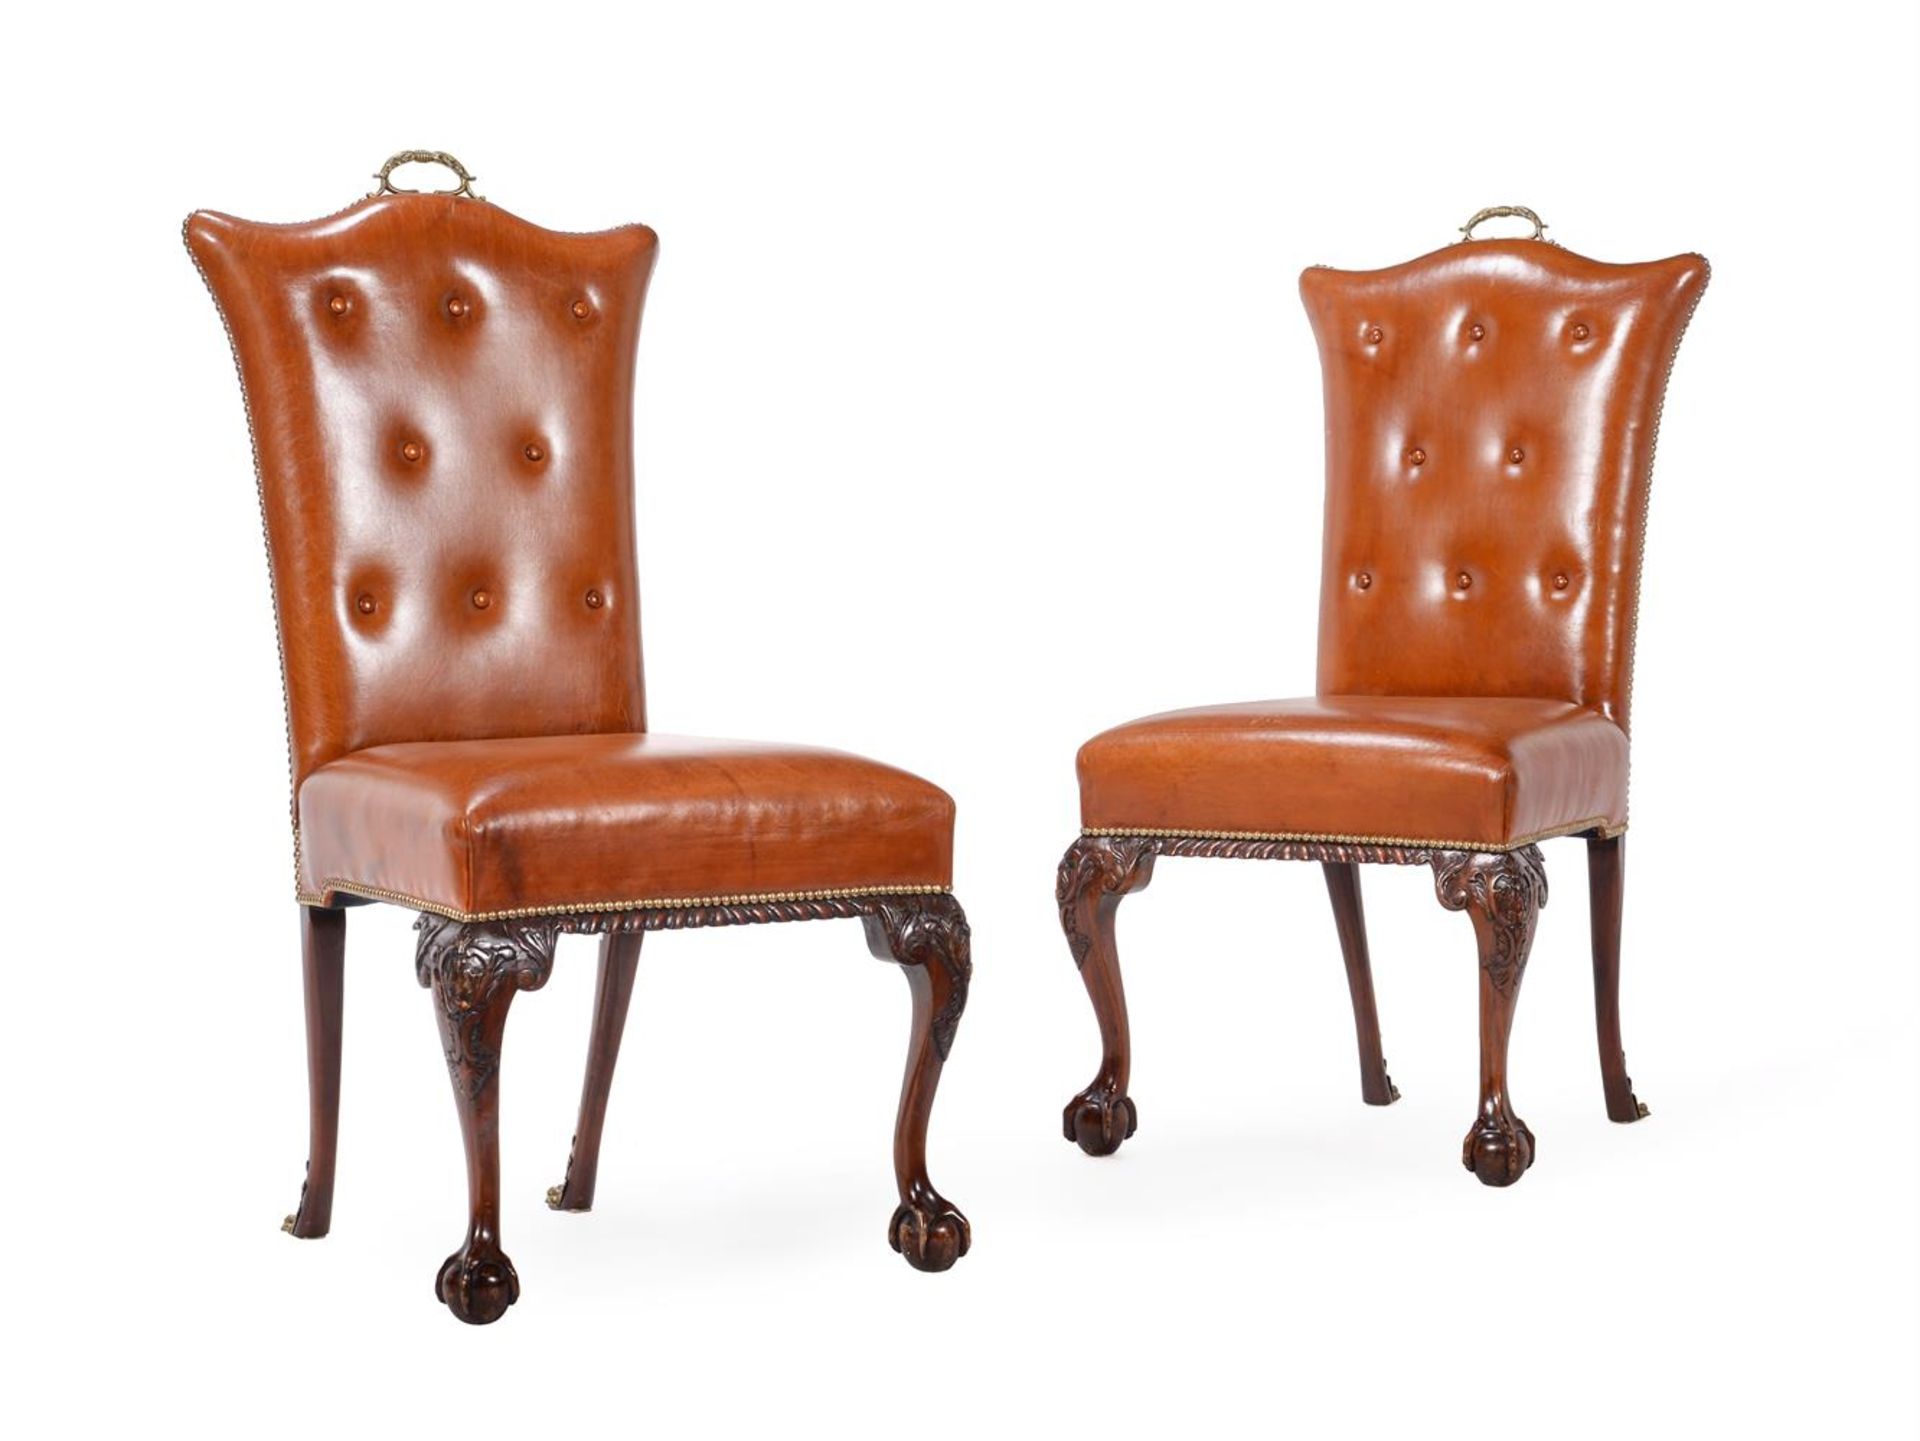 A SET OF SIX MAHOGANY AND GILT METAL MOUNTED DINING CHAIRS, IN MID 18TH CENTURY STYLE - Image 2 of 5